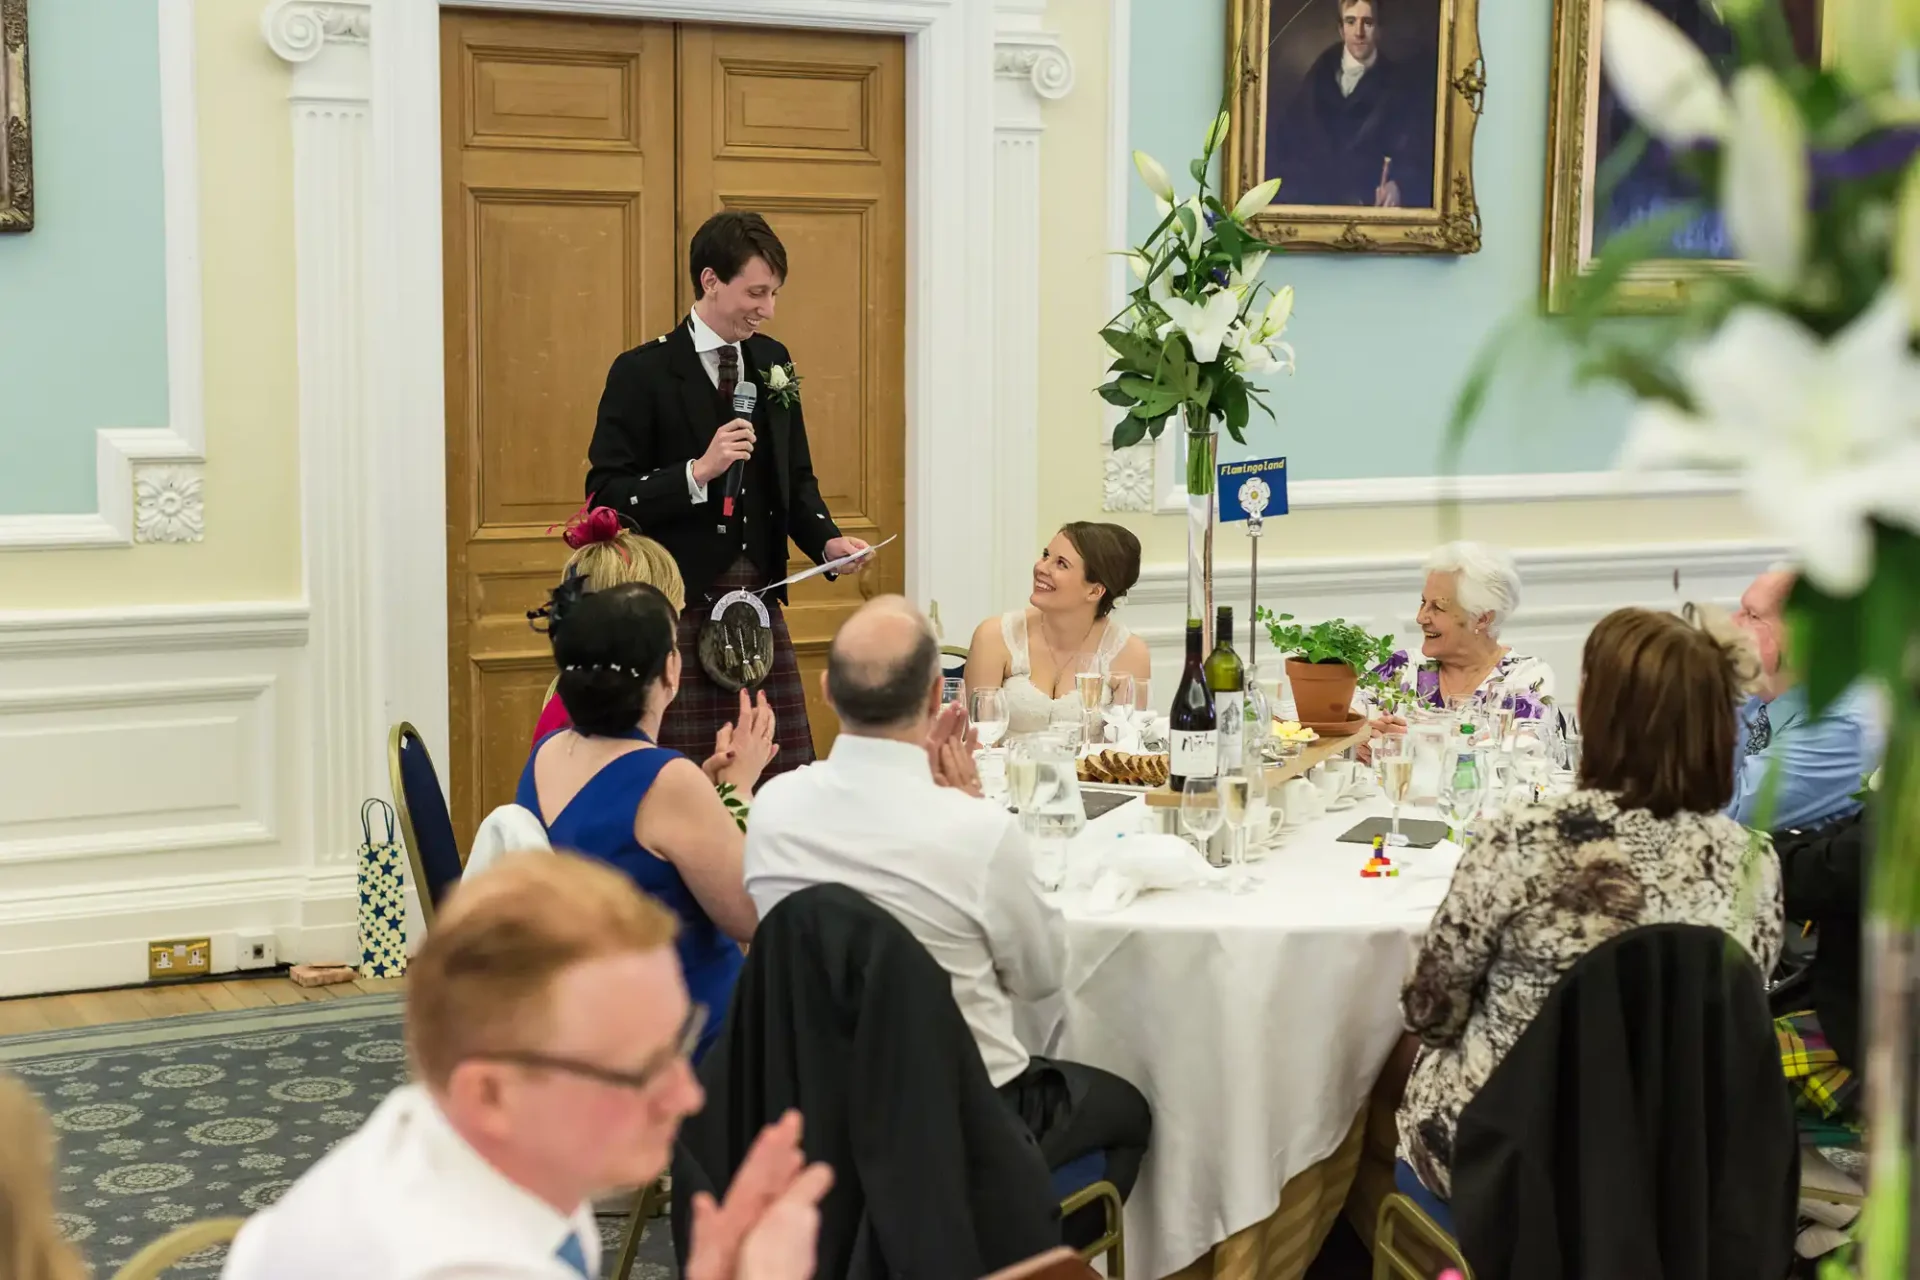 A man in a tuxedo giving a speech at a wedding reception, with guests seated at tables listening and smiling, in an elegant room with white lilies on the tables.